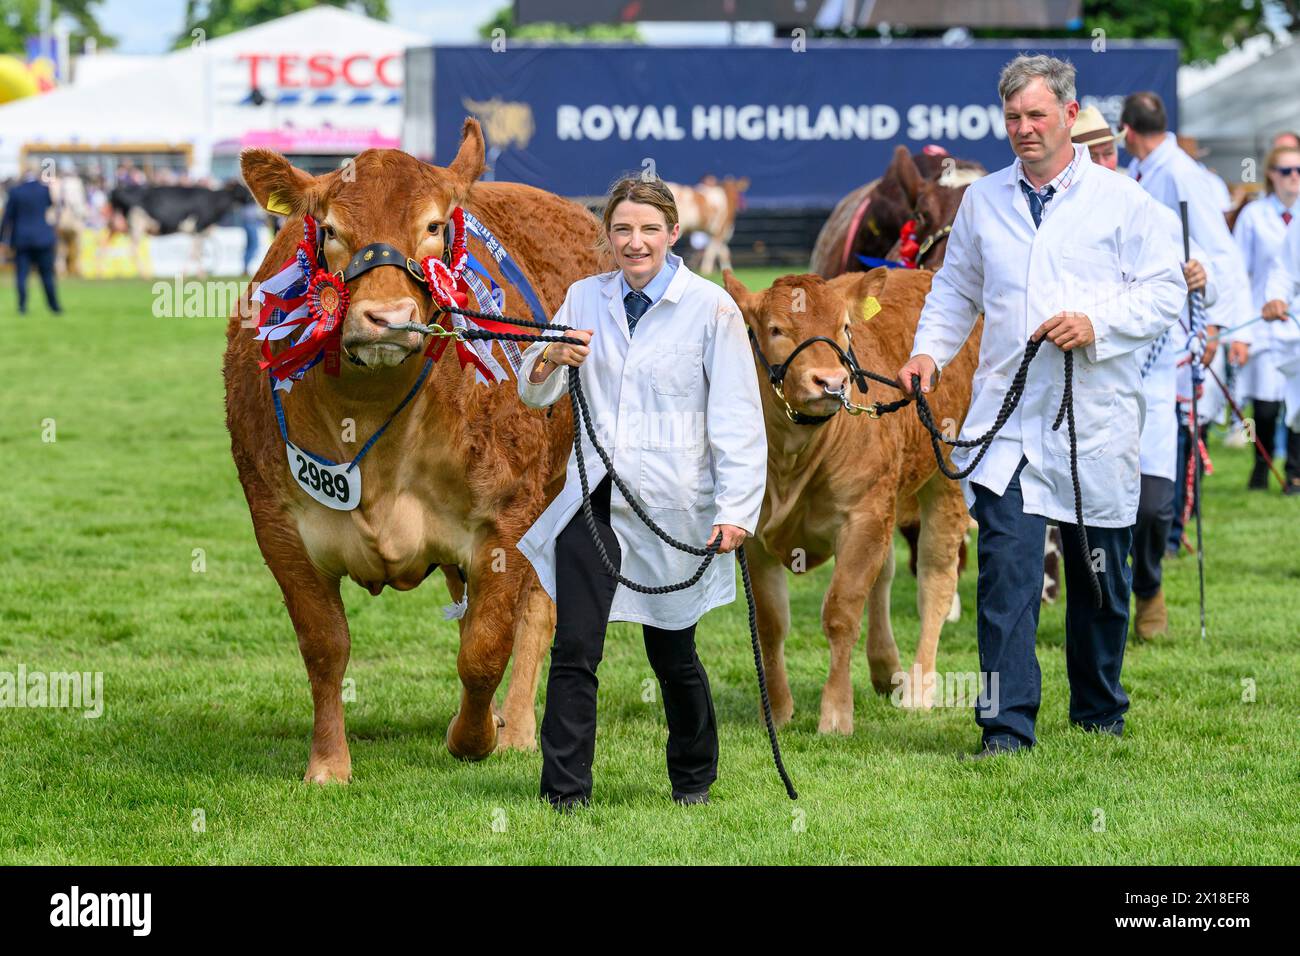 The Royal Highland Show Cattle Stock Photo